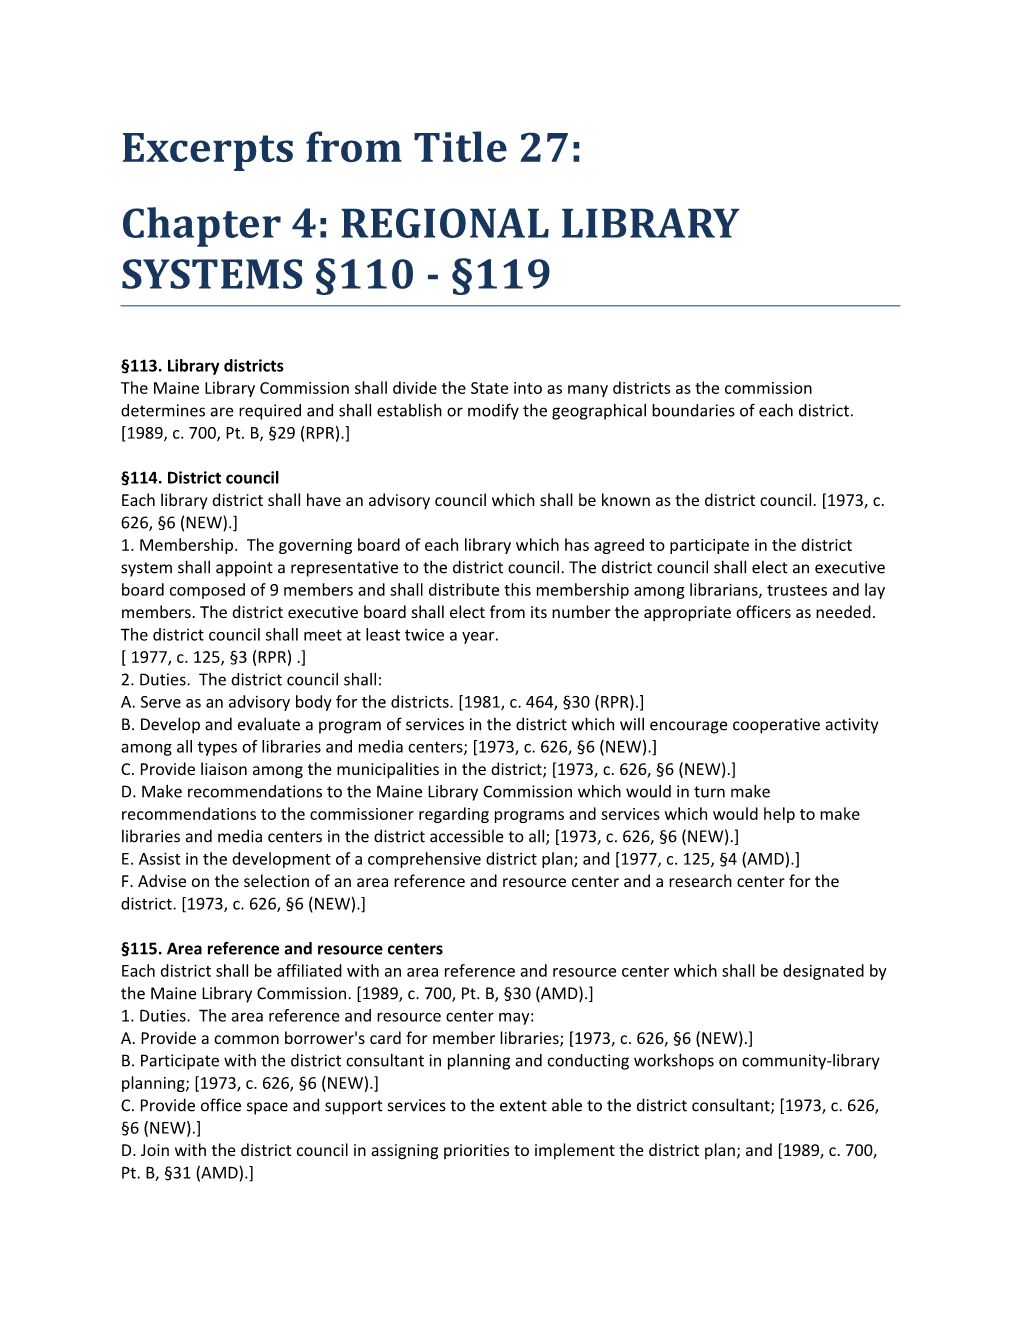 Chapter 4: REGIONAL LIBRARY SYSTEMS 110 - 119